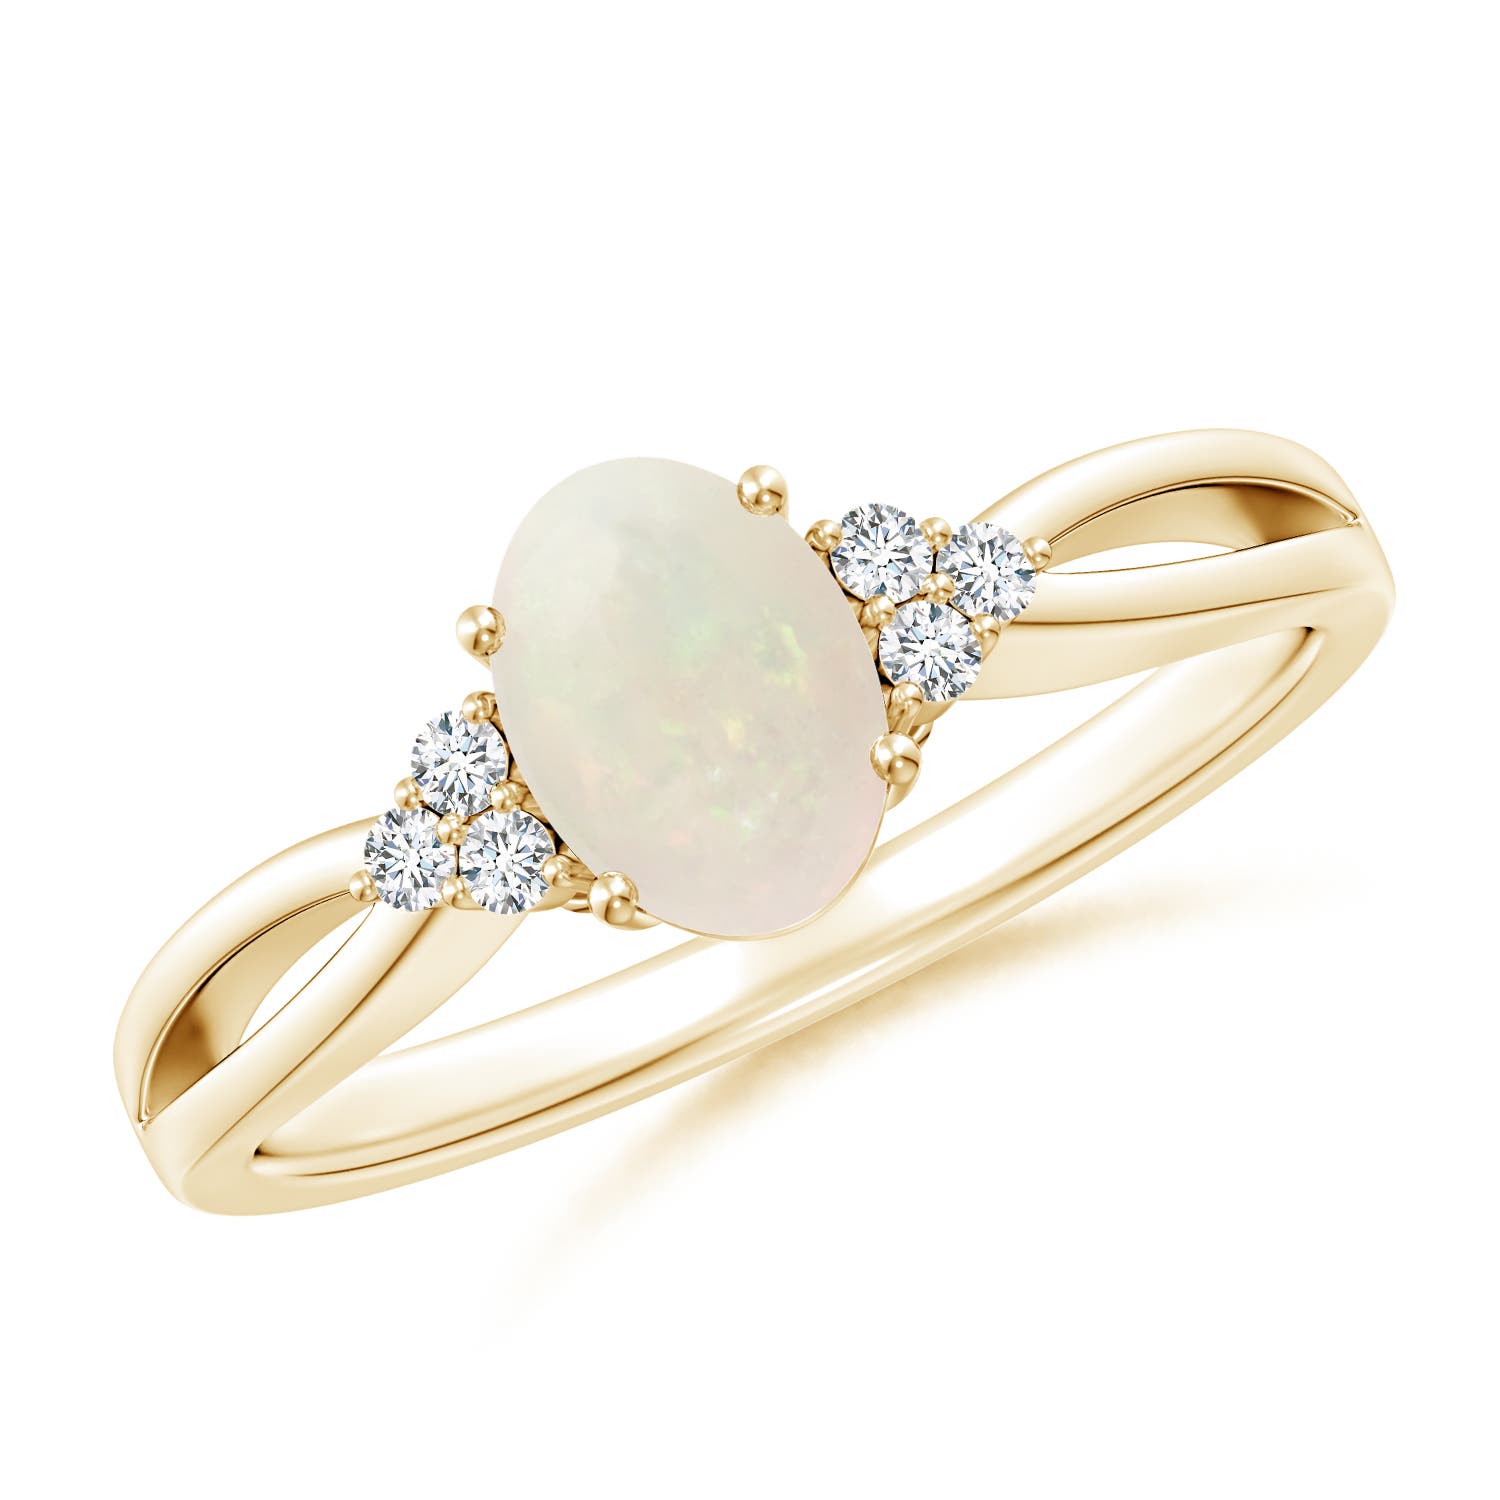 A - Opal / 0.52 CT / 14 KT Yellow Gold